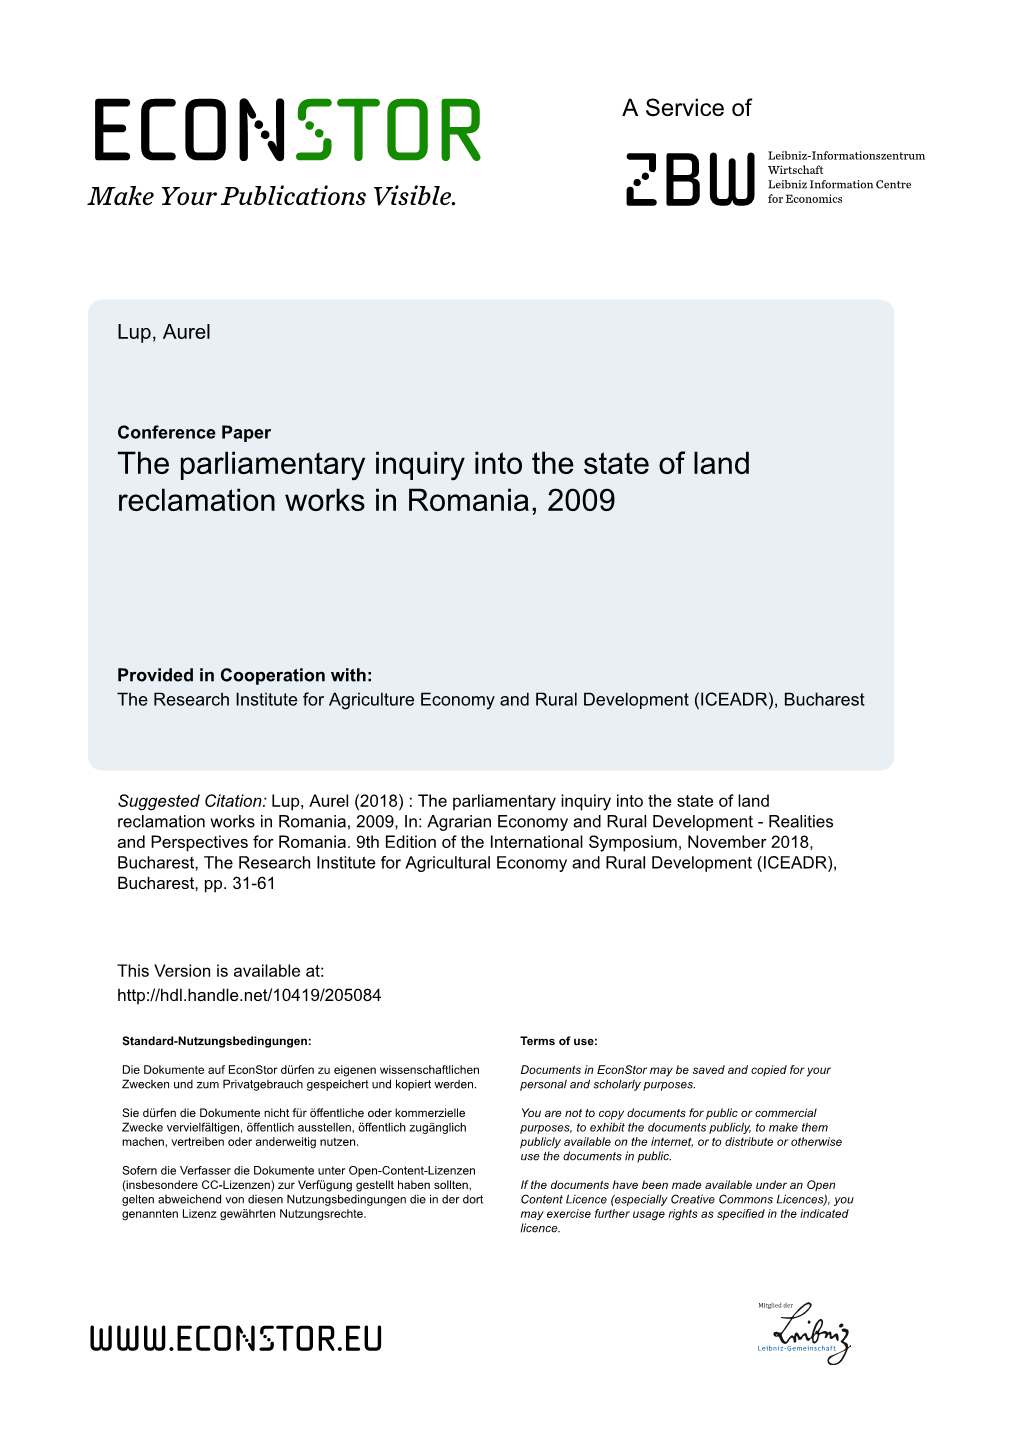 The Parliamentary Inquiry Into the State of Land Reclamation Works in Romania, 2009